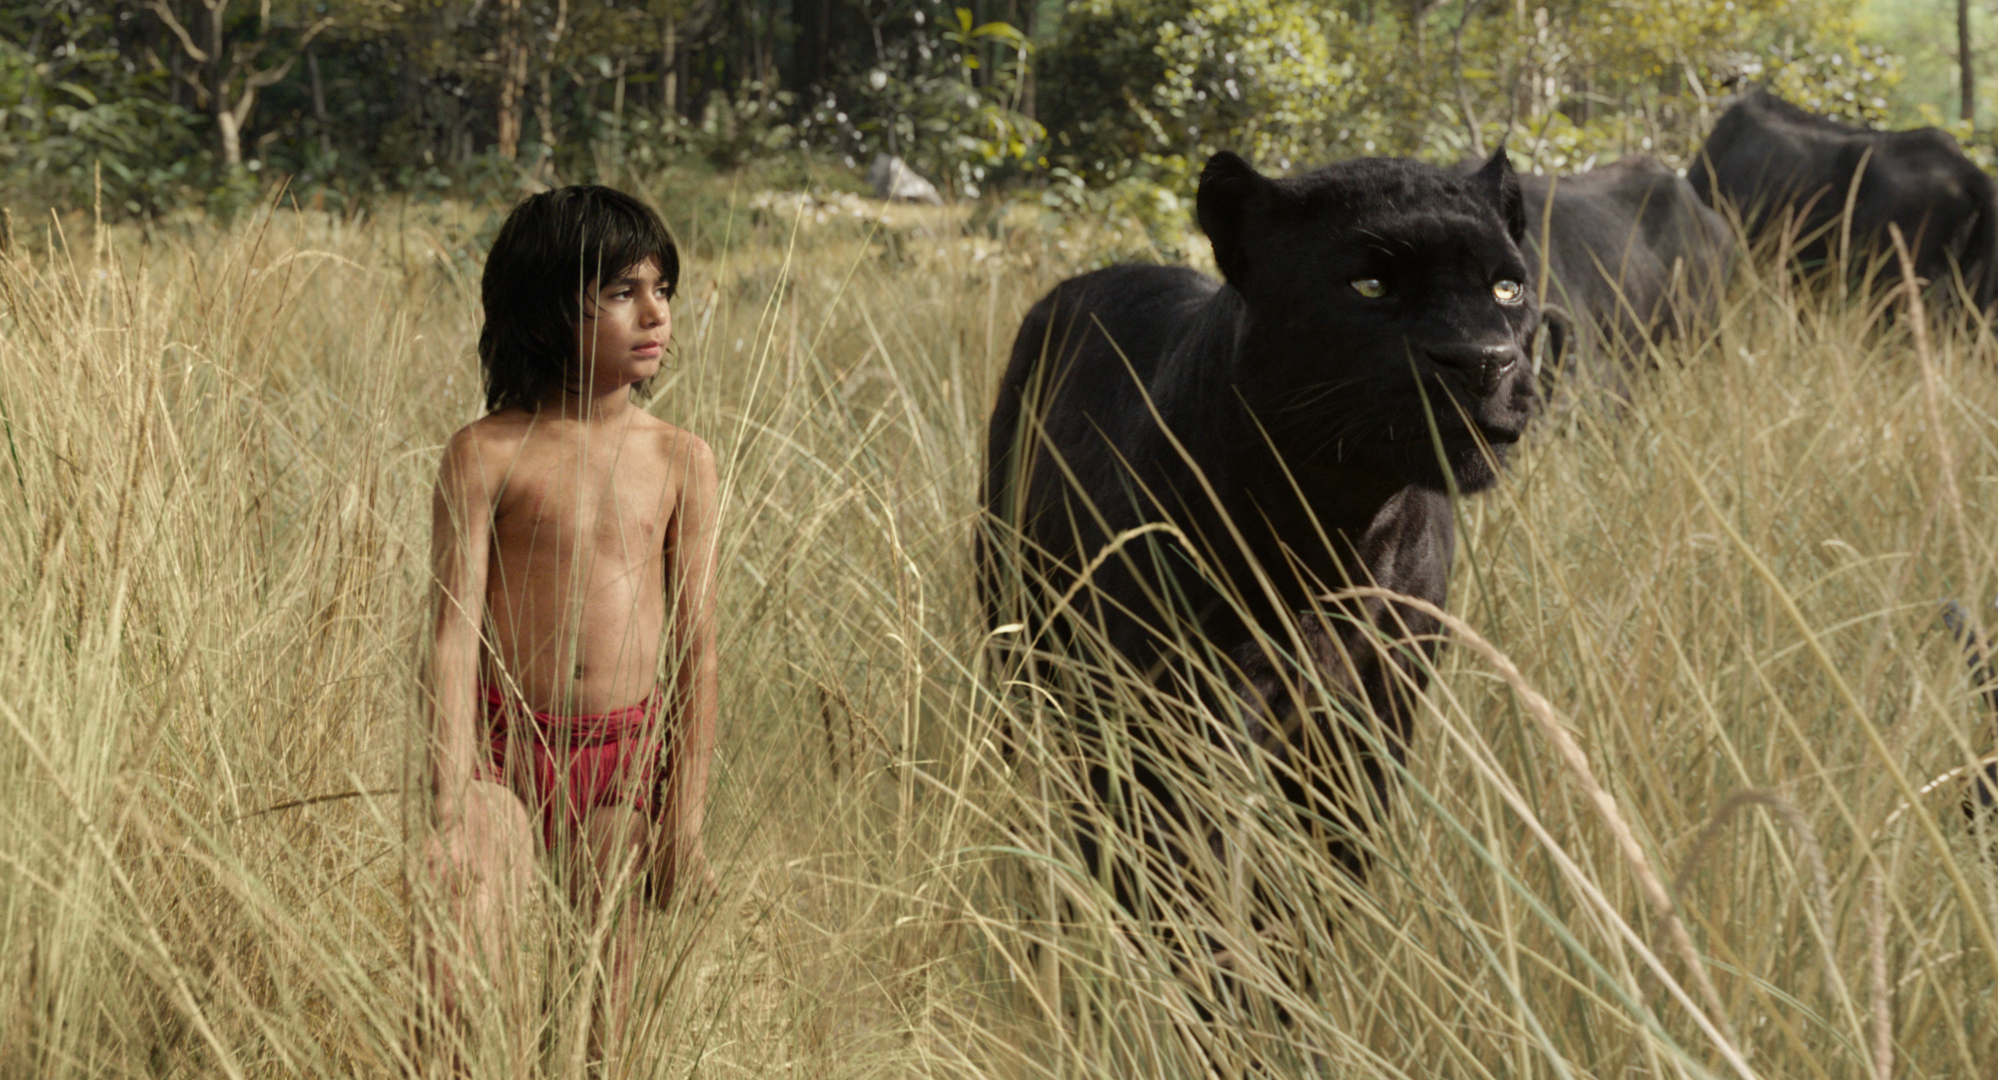 Mowgli (newcomer Neel Sethi) and Bagheera (voice of Ben Kingsley) embark on a captivating journey in “The Jungle Book,” an all-new live-action epic adventure about Mowgli, a man-cub raised in the jungle by a family of wolves, who is forced to abandon the only home he’s ever known. In theaters April 15, 2016. ©2015 Disney Enterprises, Inc. All Rights Reserved.